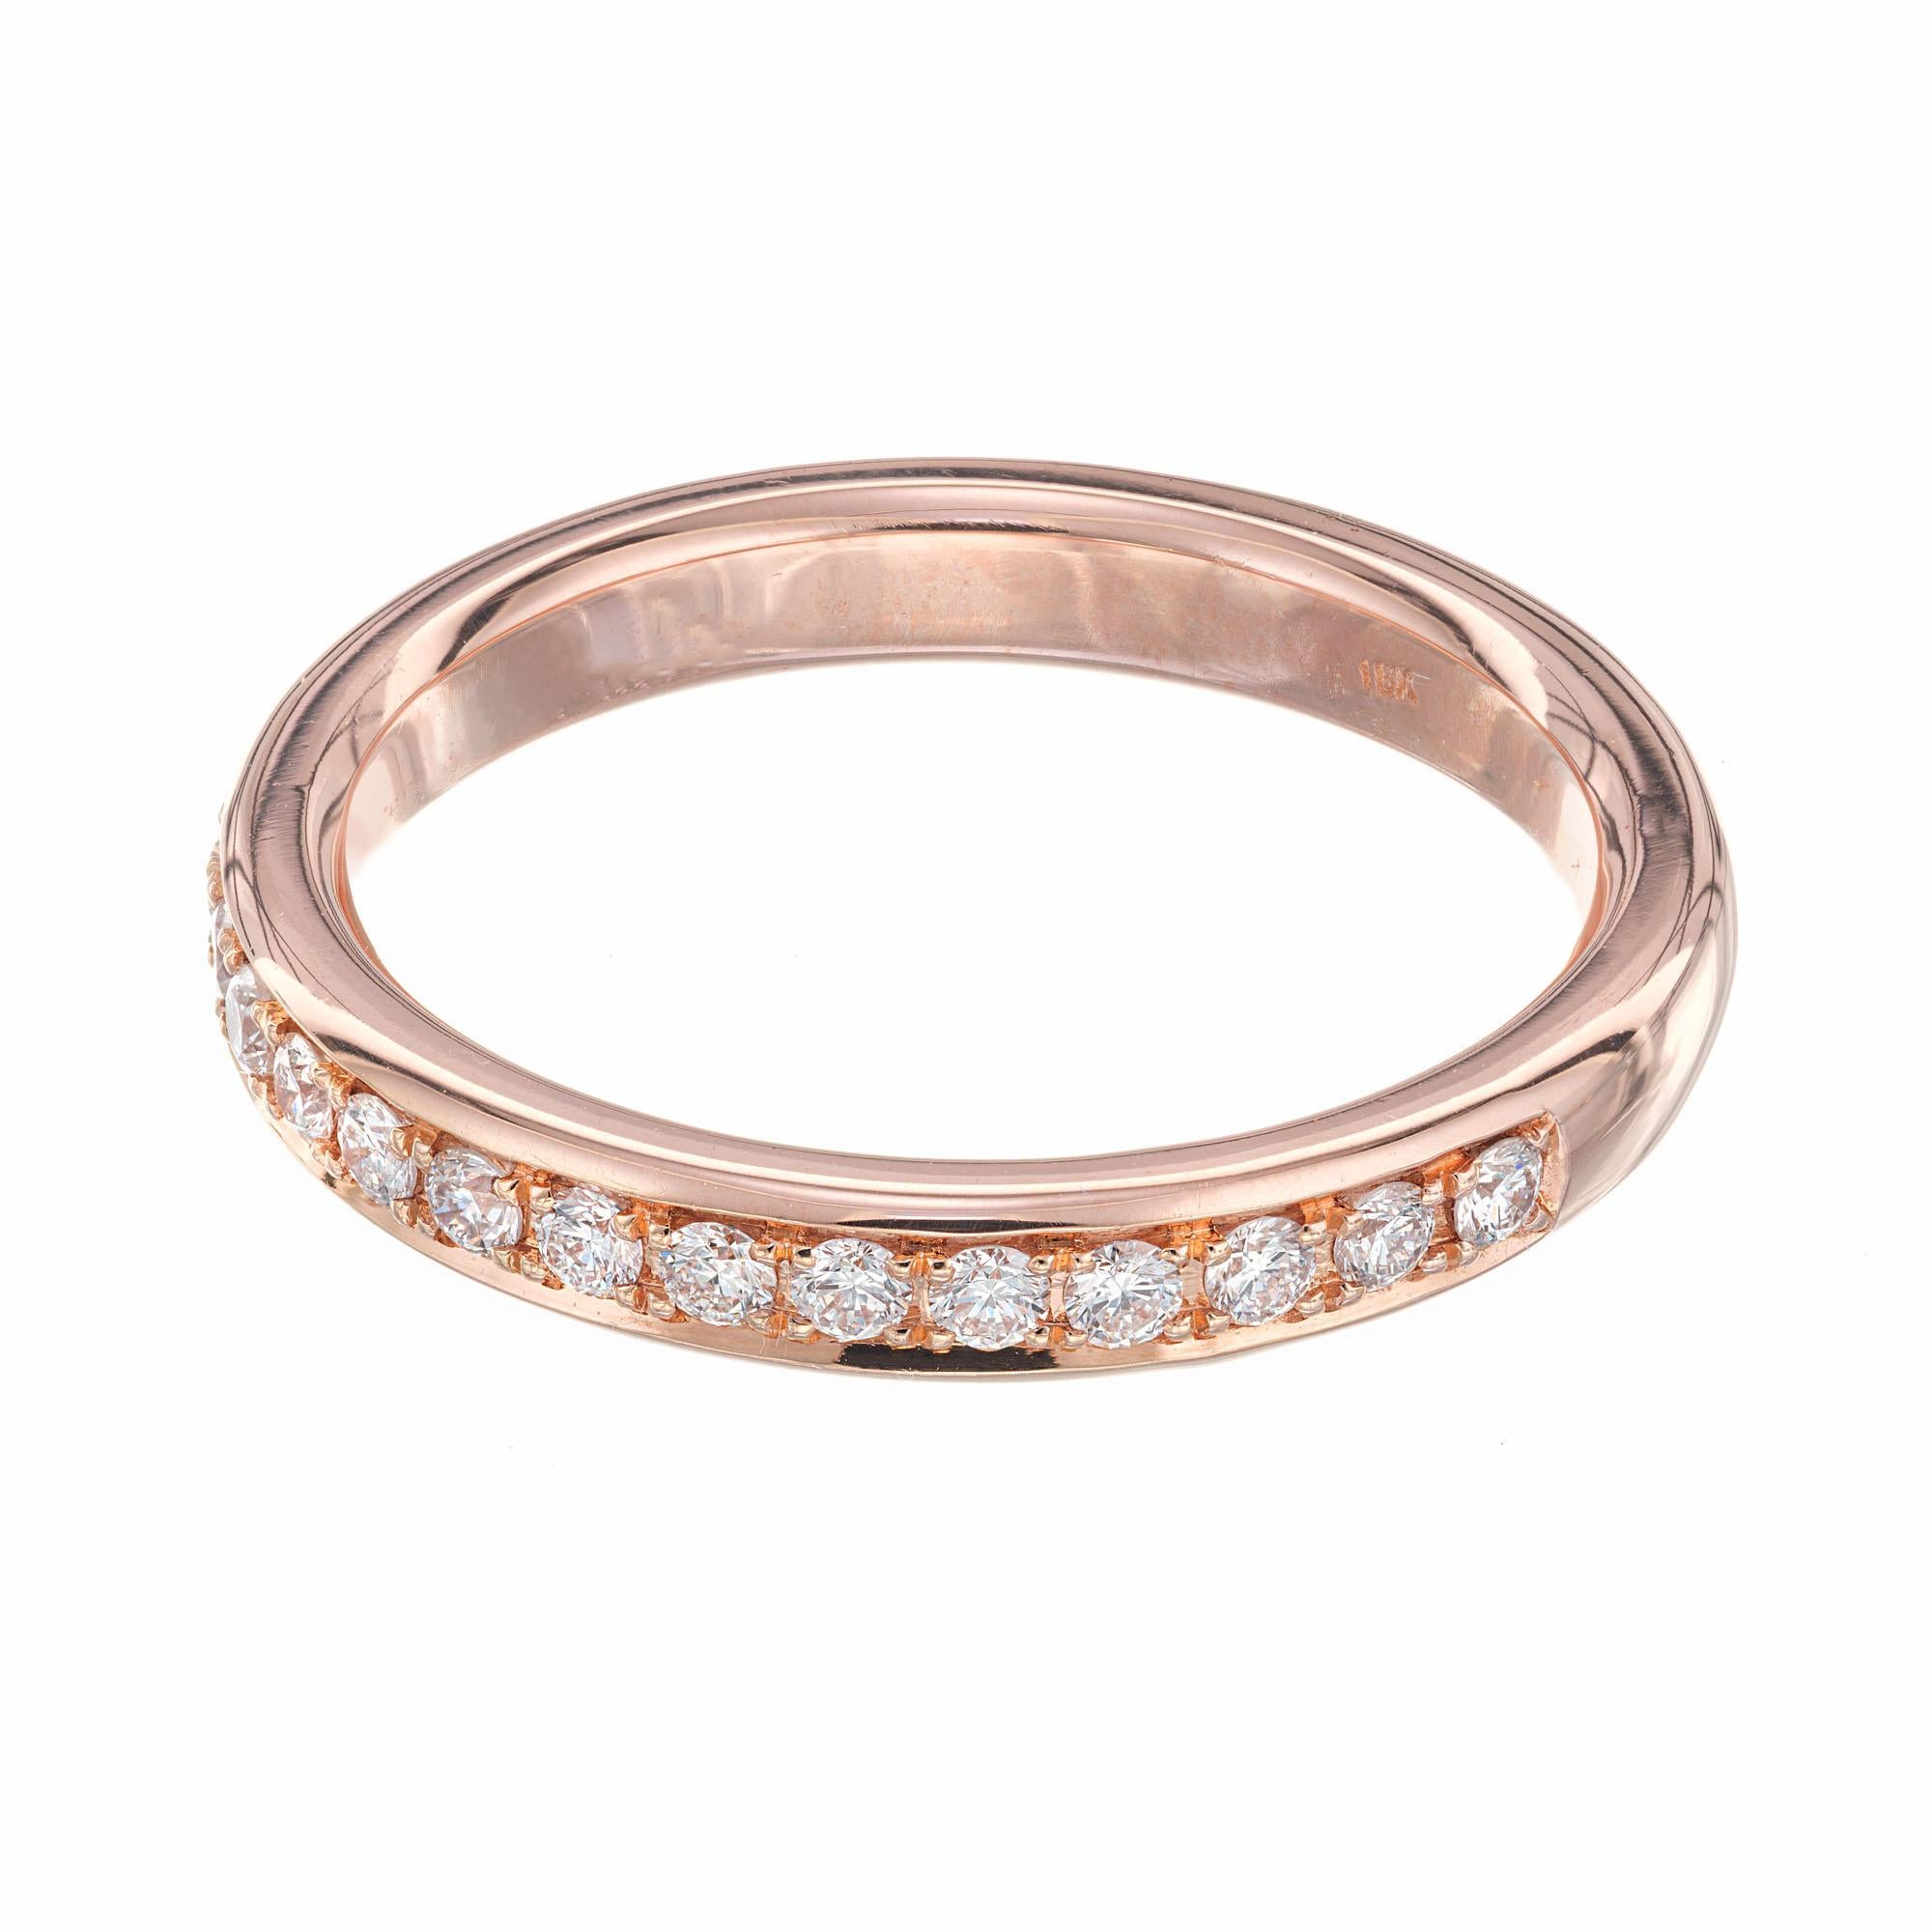 Peter Suchy diamond Eternity 18k rose gold wedding band. Custom made in Victorian Revival style hand set with 18 full cut bead set diamonds in a round band. Can be made in any finger size. 

18 round diamonds, approx. total weight .30cts, F, VS
Size